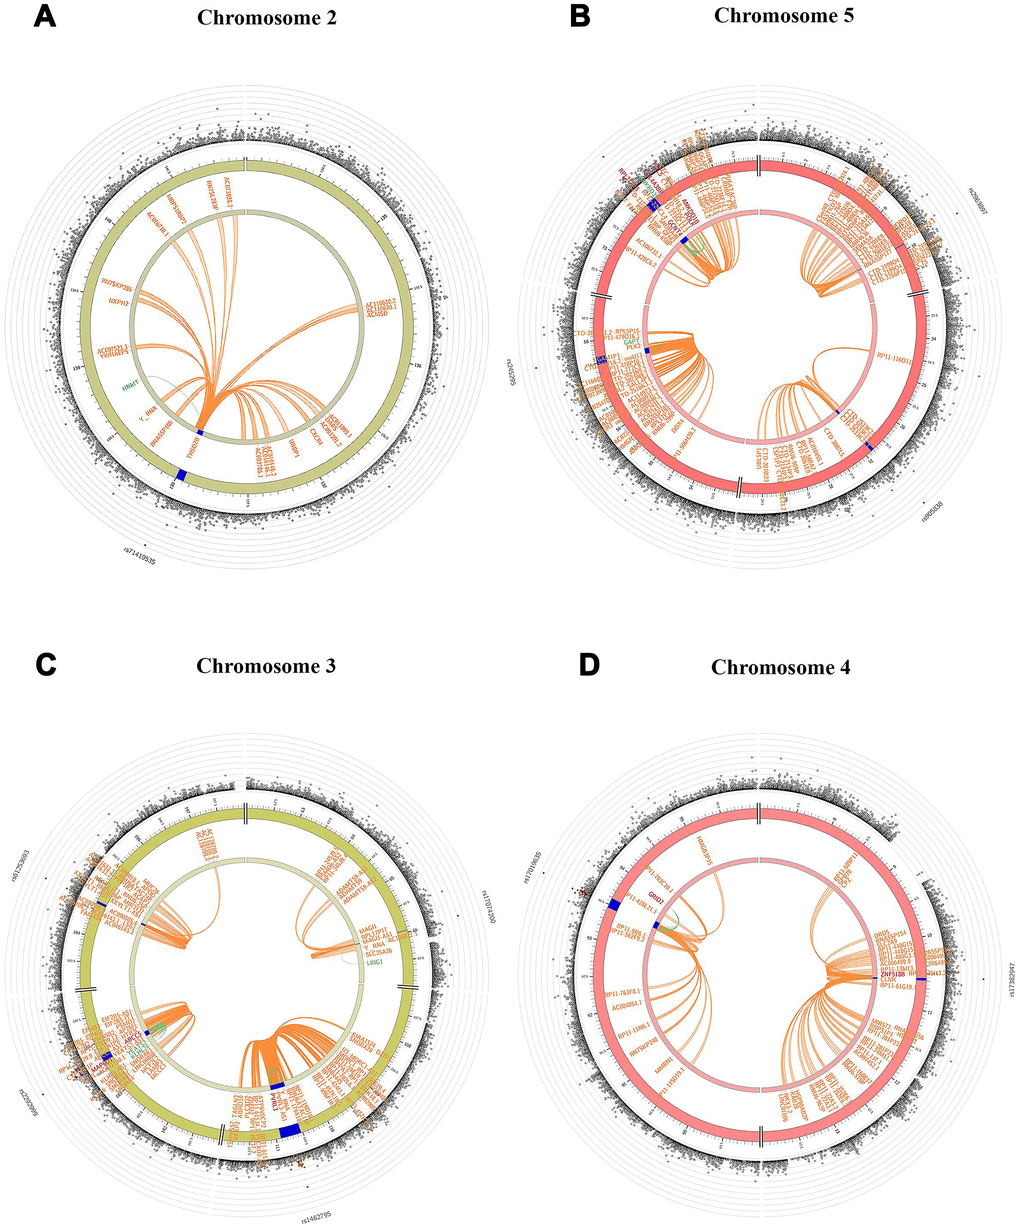 Circos plots indicating genes from genome-wide significant SNPs on chromosomes 2 (A), 5 (B) in Danish sample and 3 (C), 4 (D) in Chinese sample based on GCC model. The blue region shows the genomic risk region. Genes mapped by chromatin interaction, eQTL and both are displayed in orange, green and red respectively. The most outer layer shows a Manhattan plot only for SNPs with p 